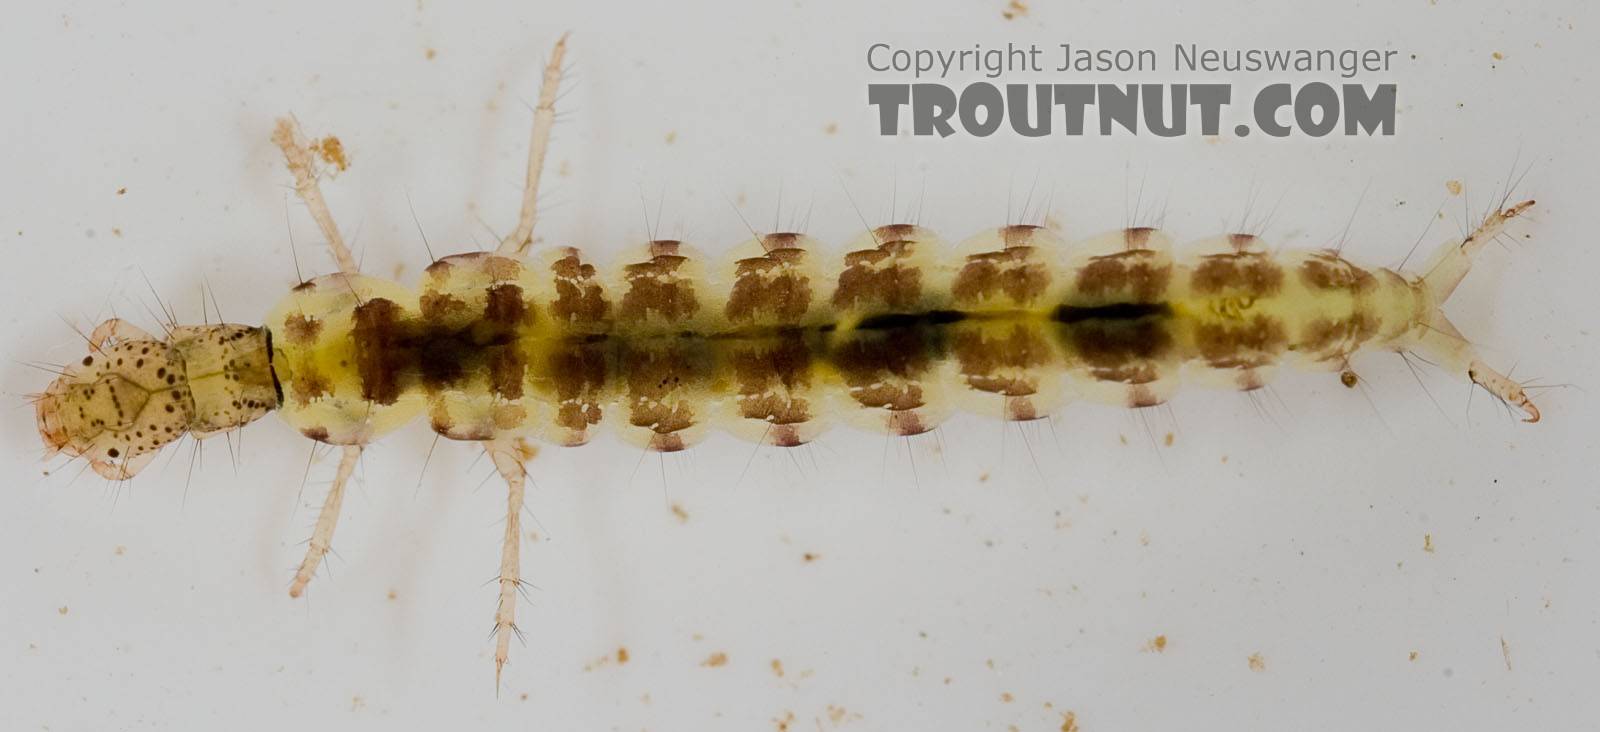 Polycentropus (Brown Checkered Summer Sedges) Caddisfly Larva from the Delaware River in New York